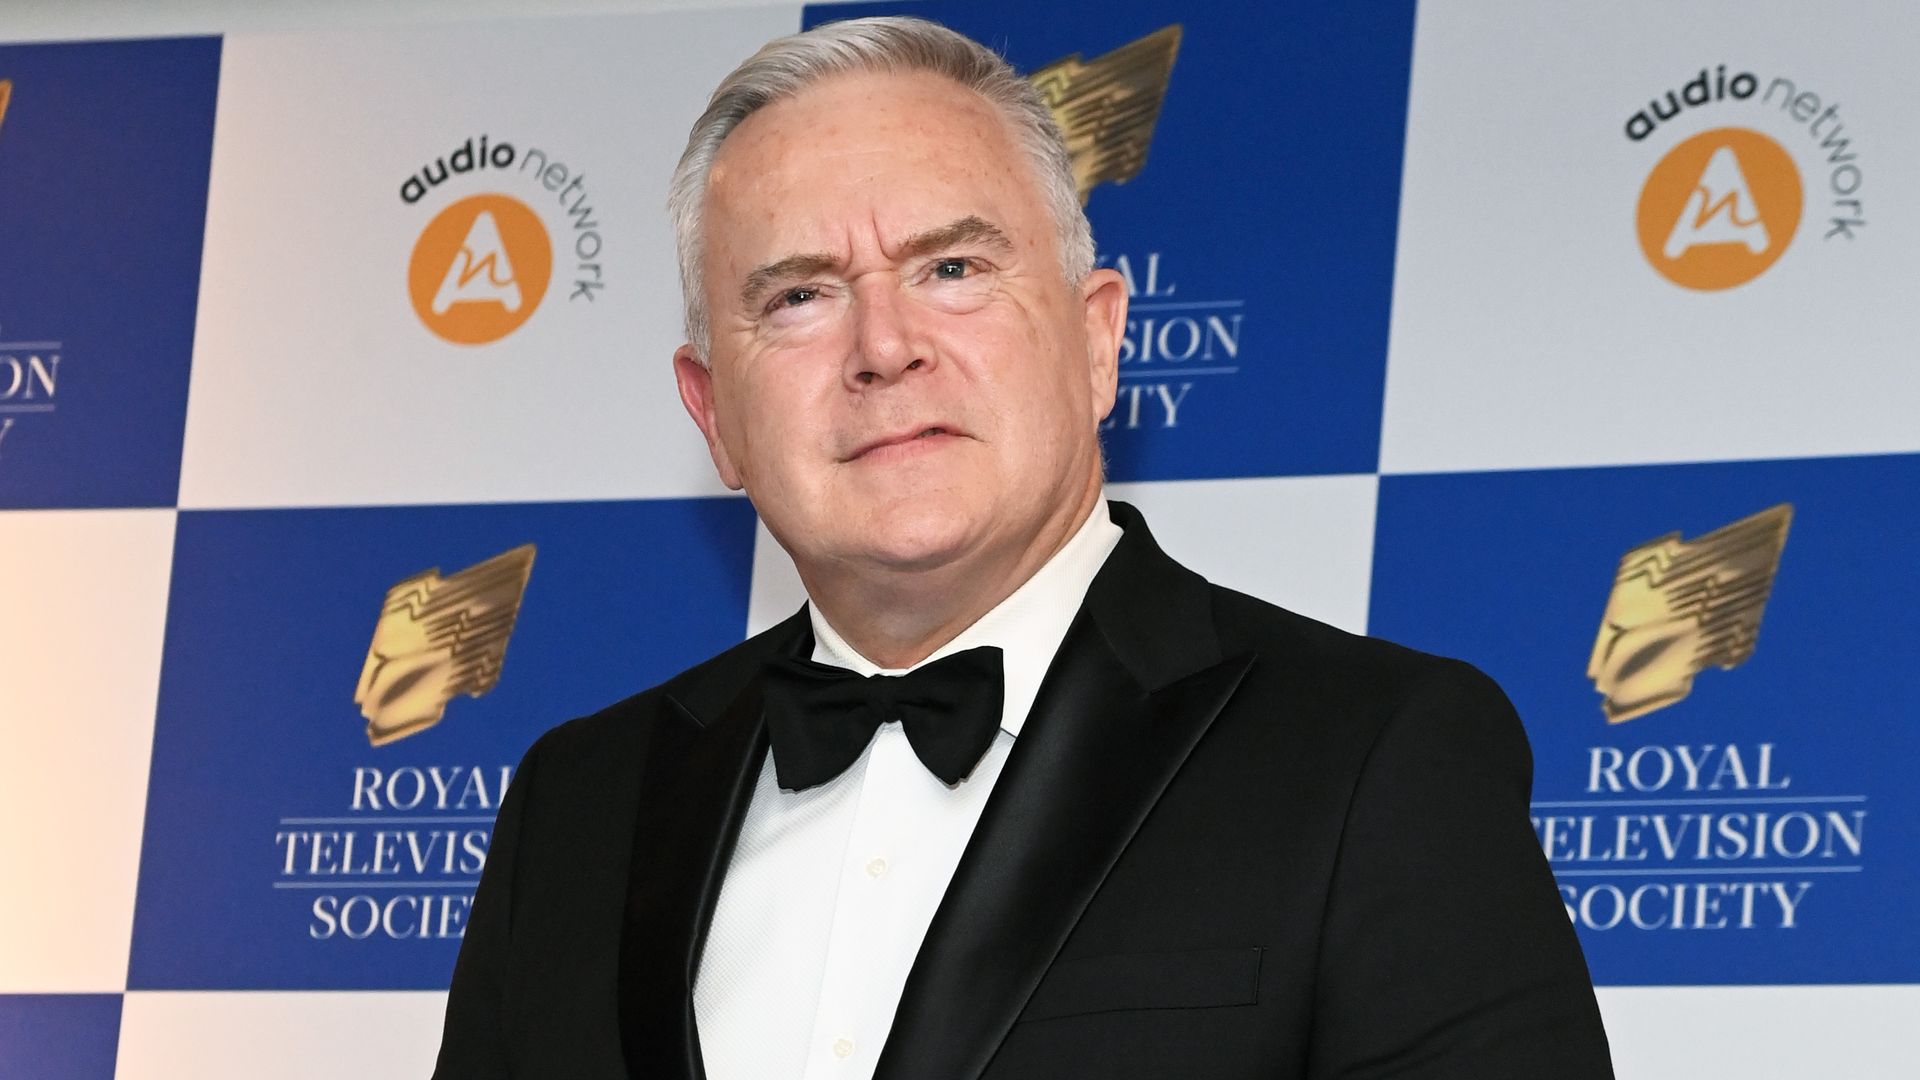 Huw Edwards in a tuxedo